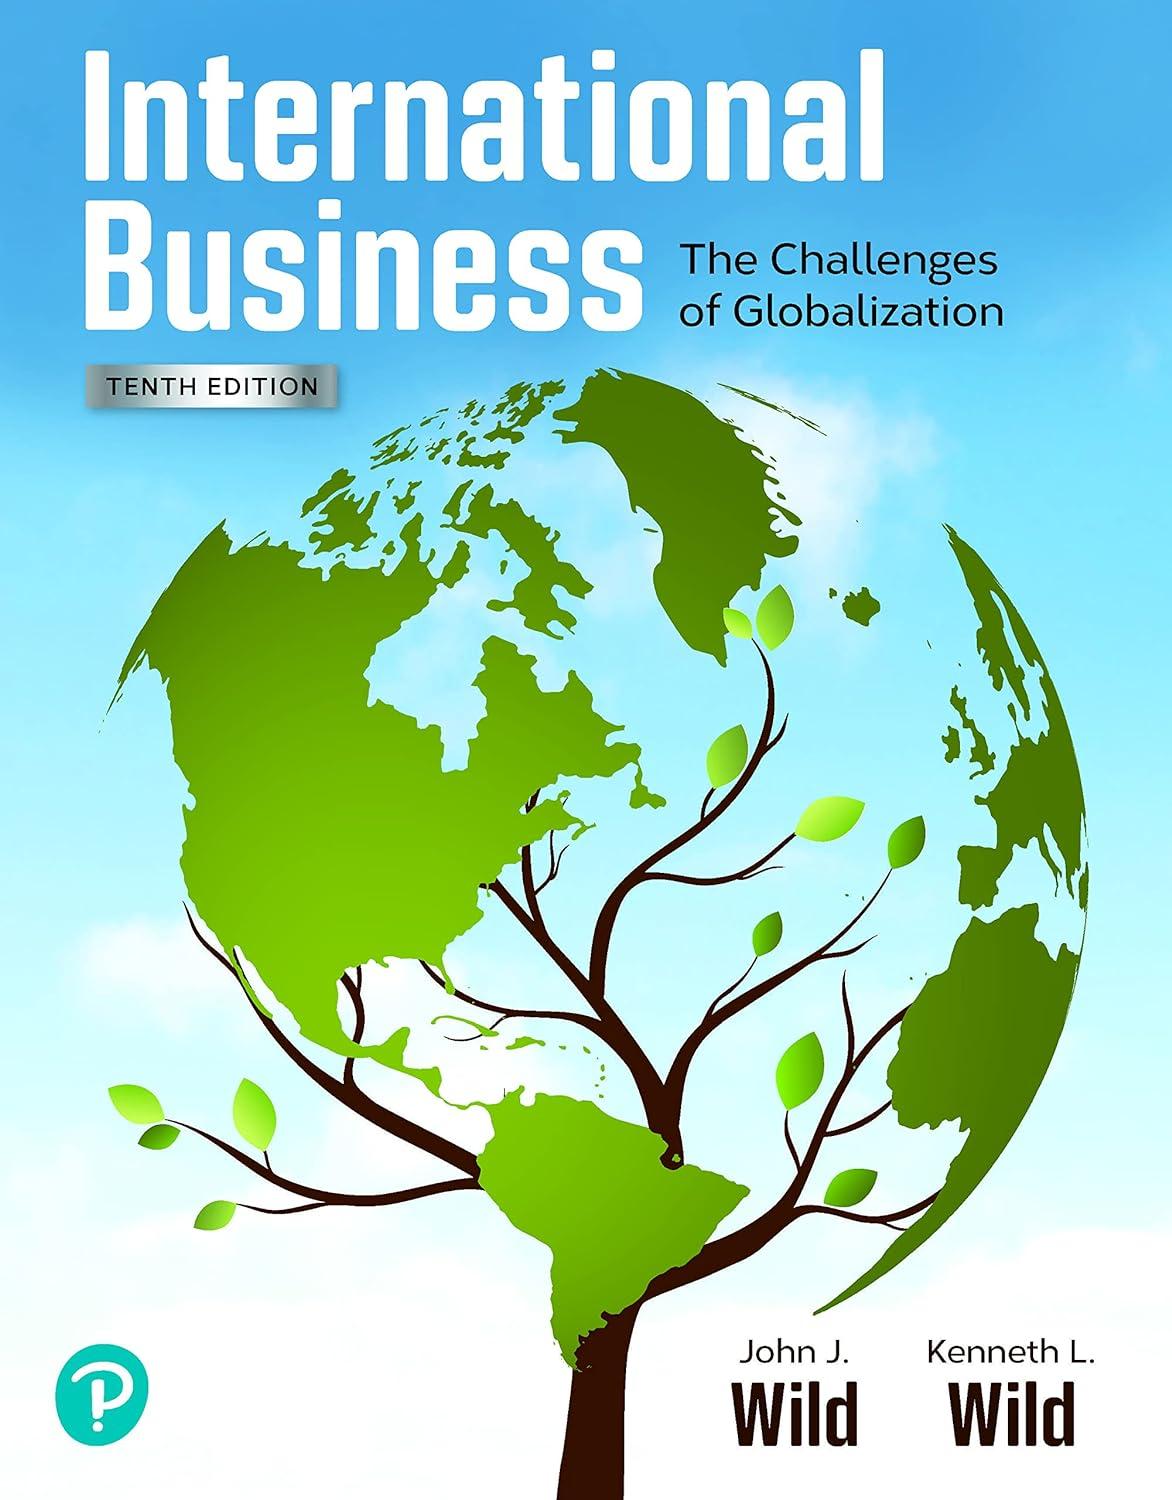 international business the challenges of globalization 10th edition john j. wild, kenneth l. wild 0137474717,